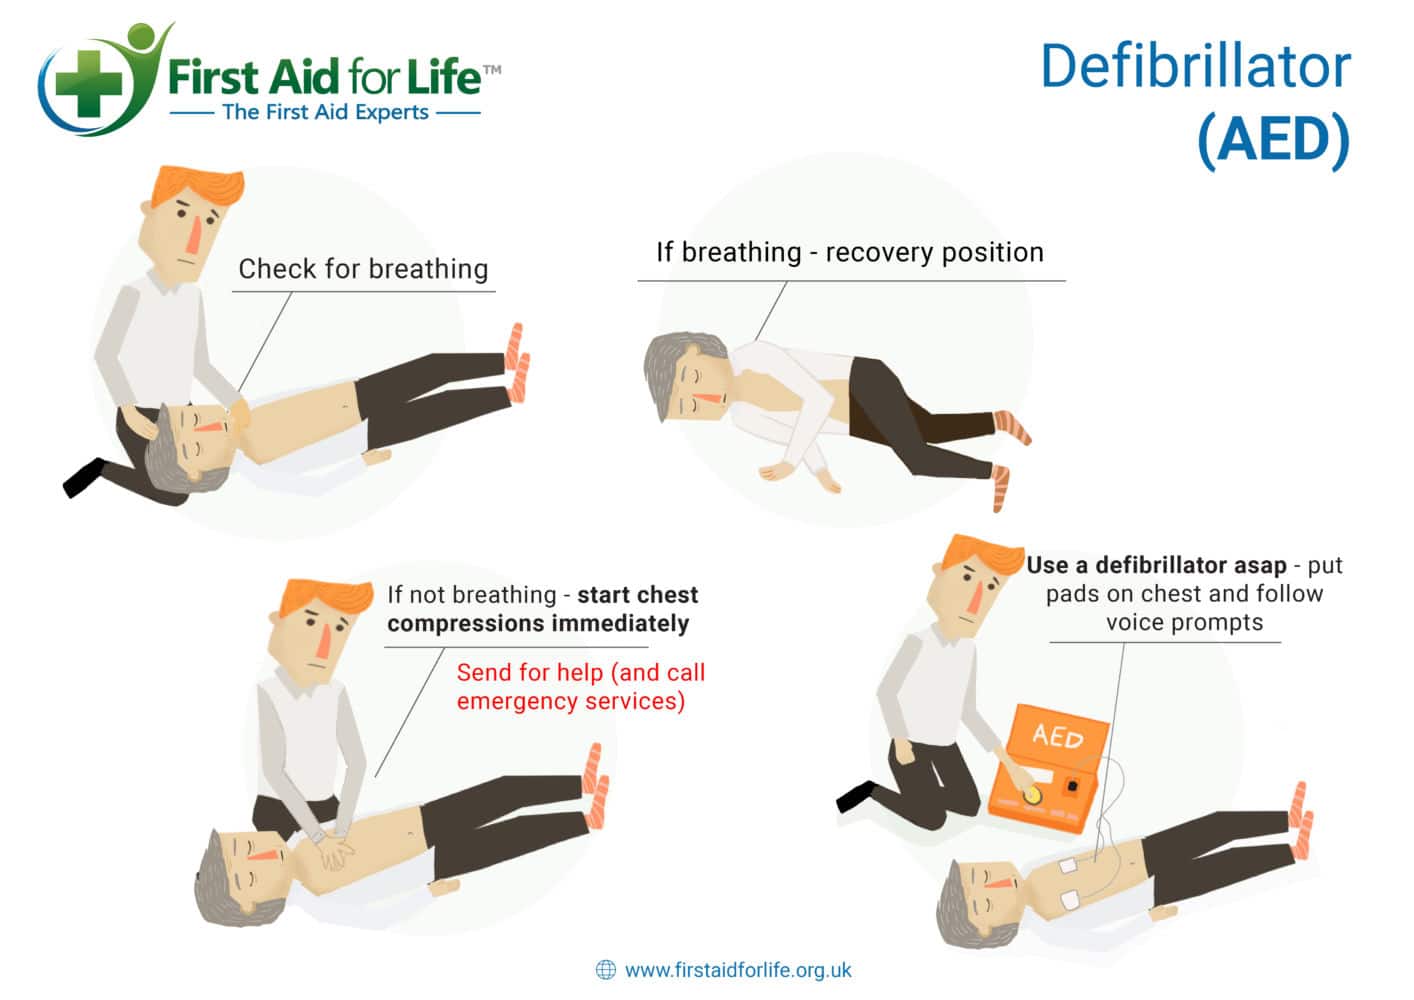 CPR - Cardio, Pulmonary Resuscitation - First Aid for Life